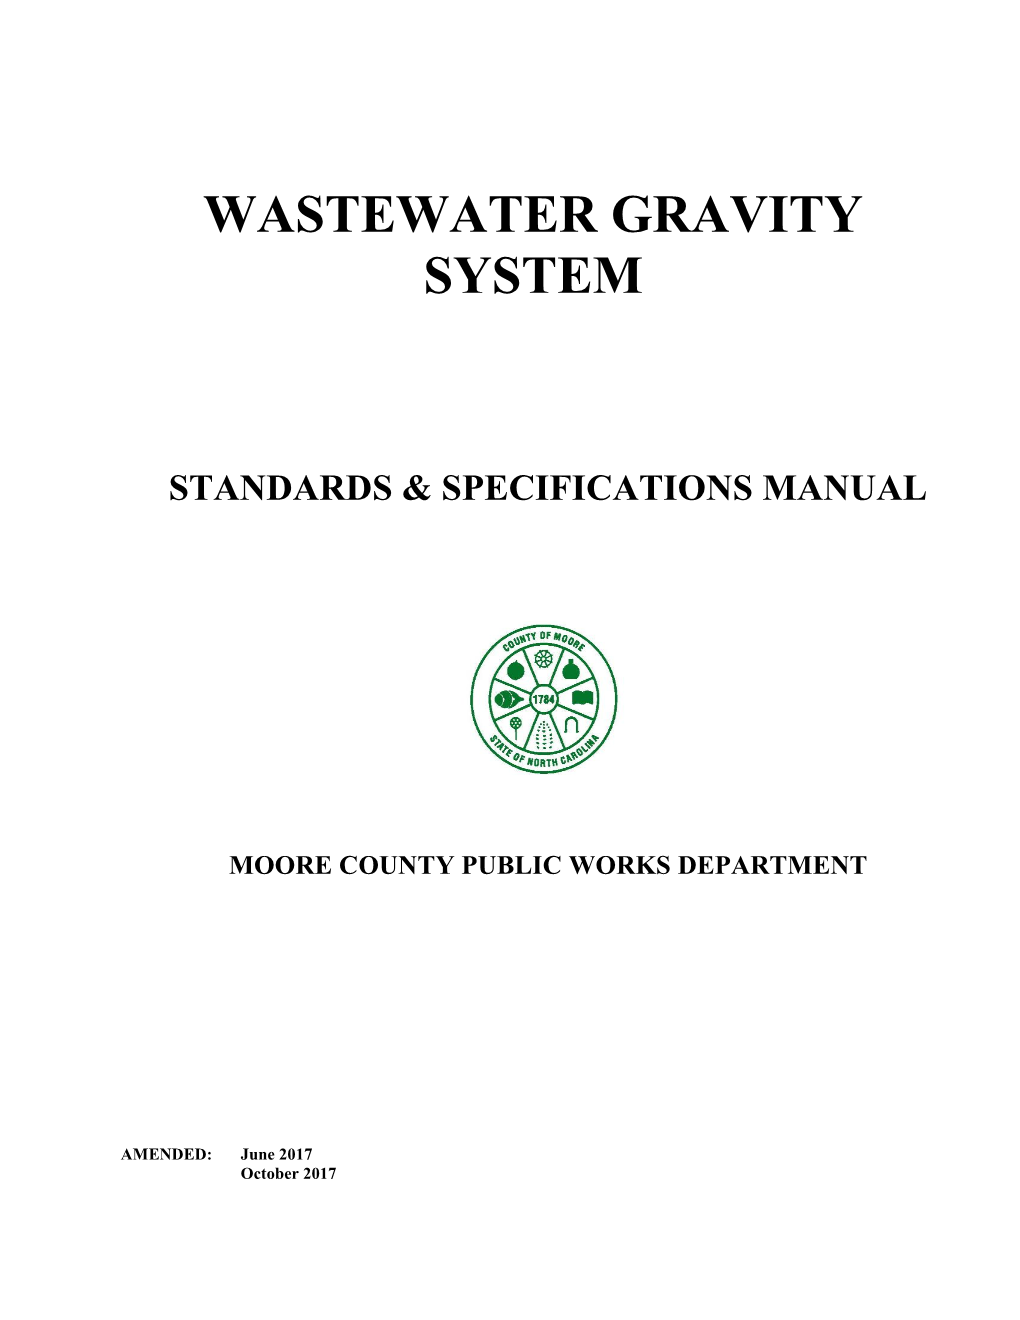 Wastewater Gravity System